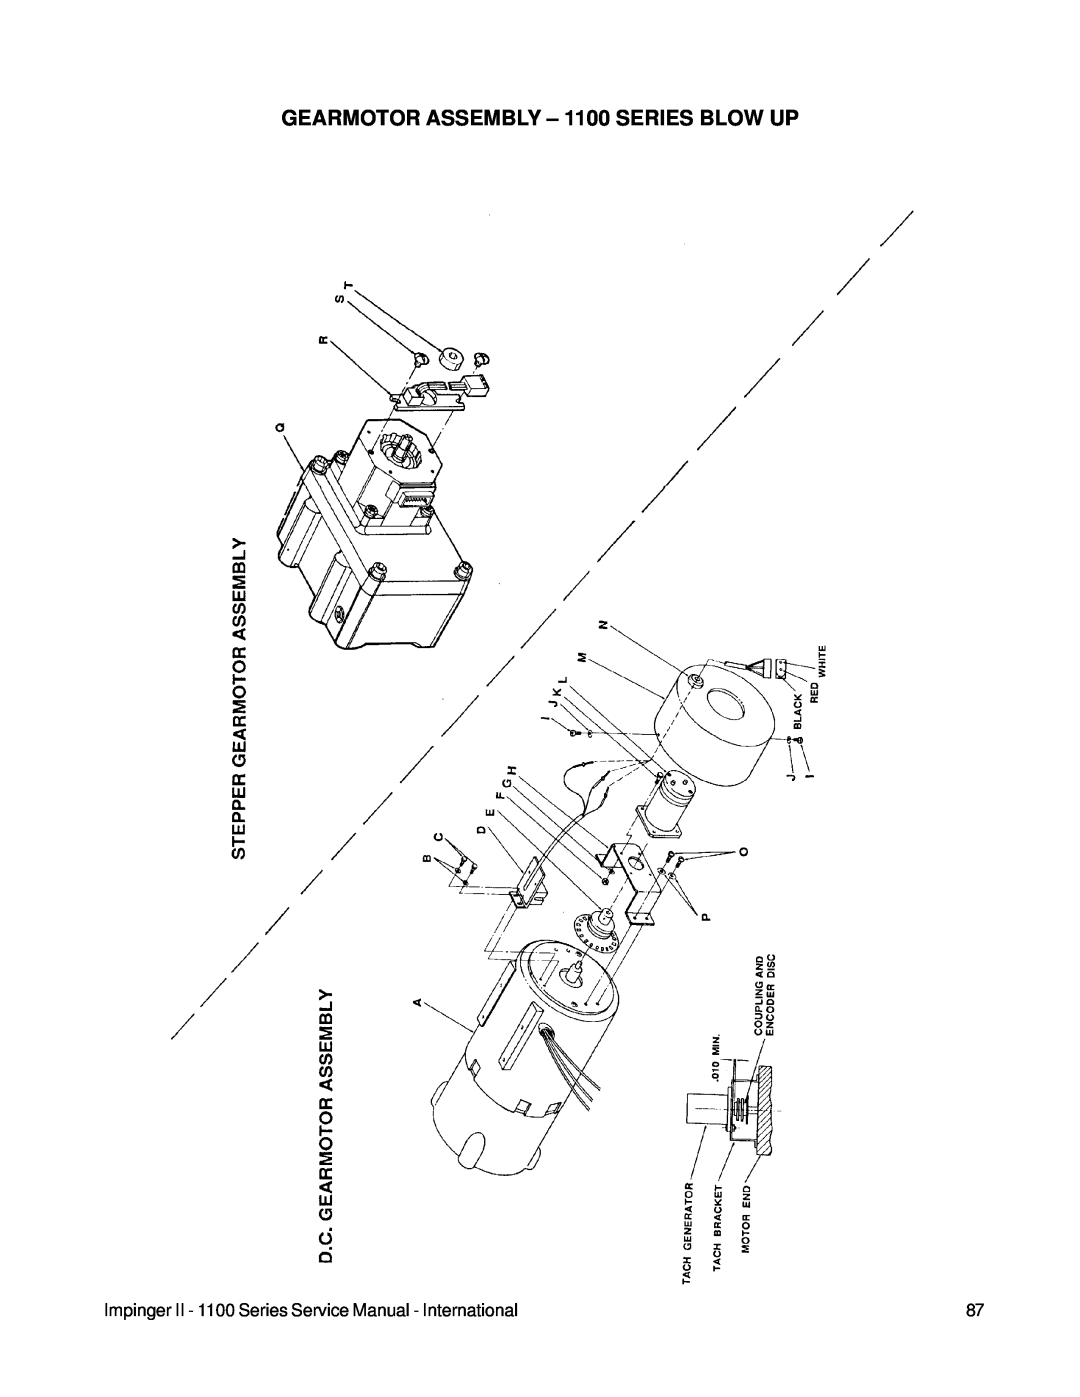 Lincoln 1100 Series service manual GEARMOTOR ASSEMBLY – 1100 SERIES BLOW UP 